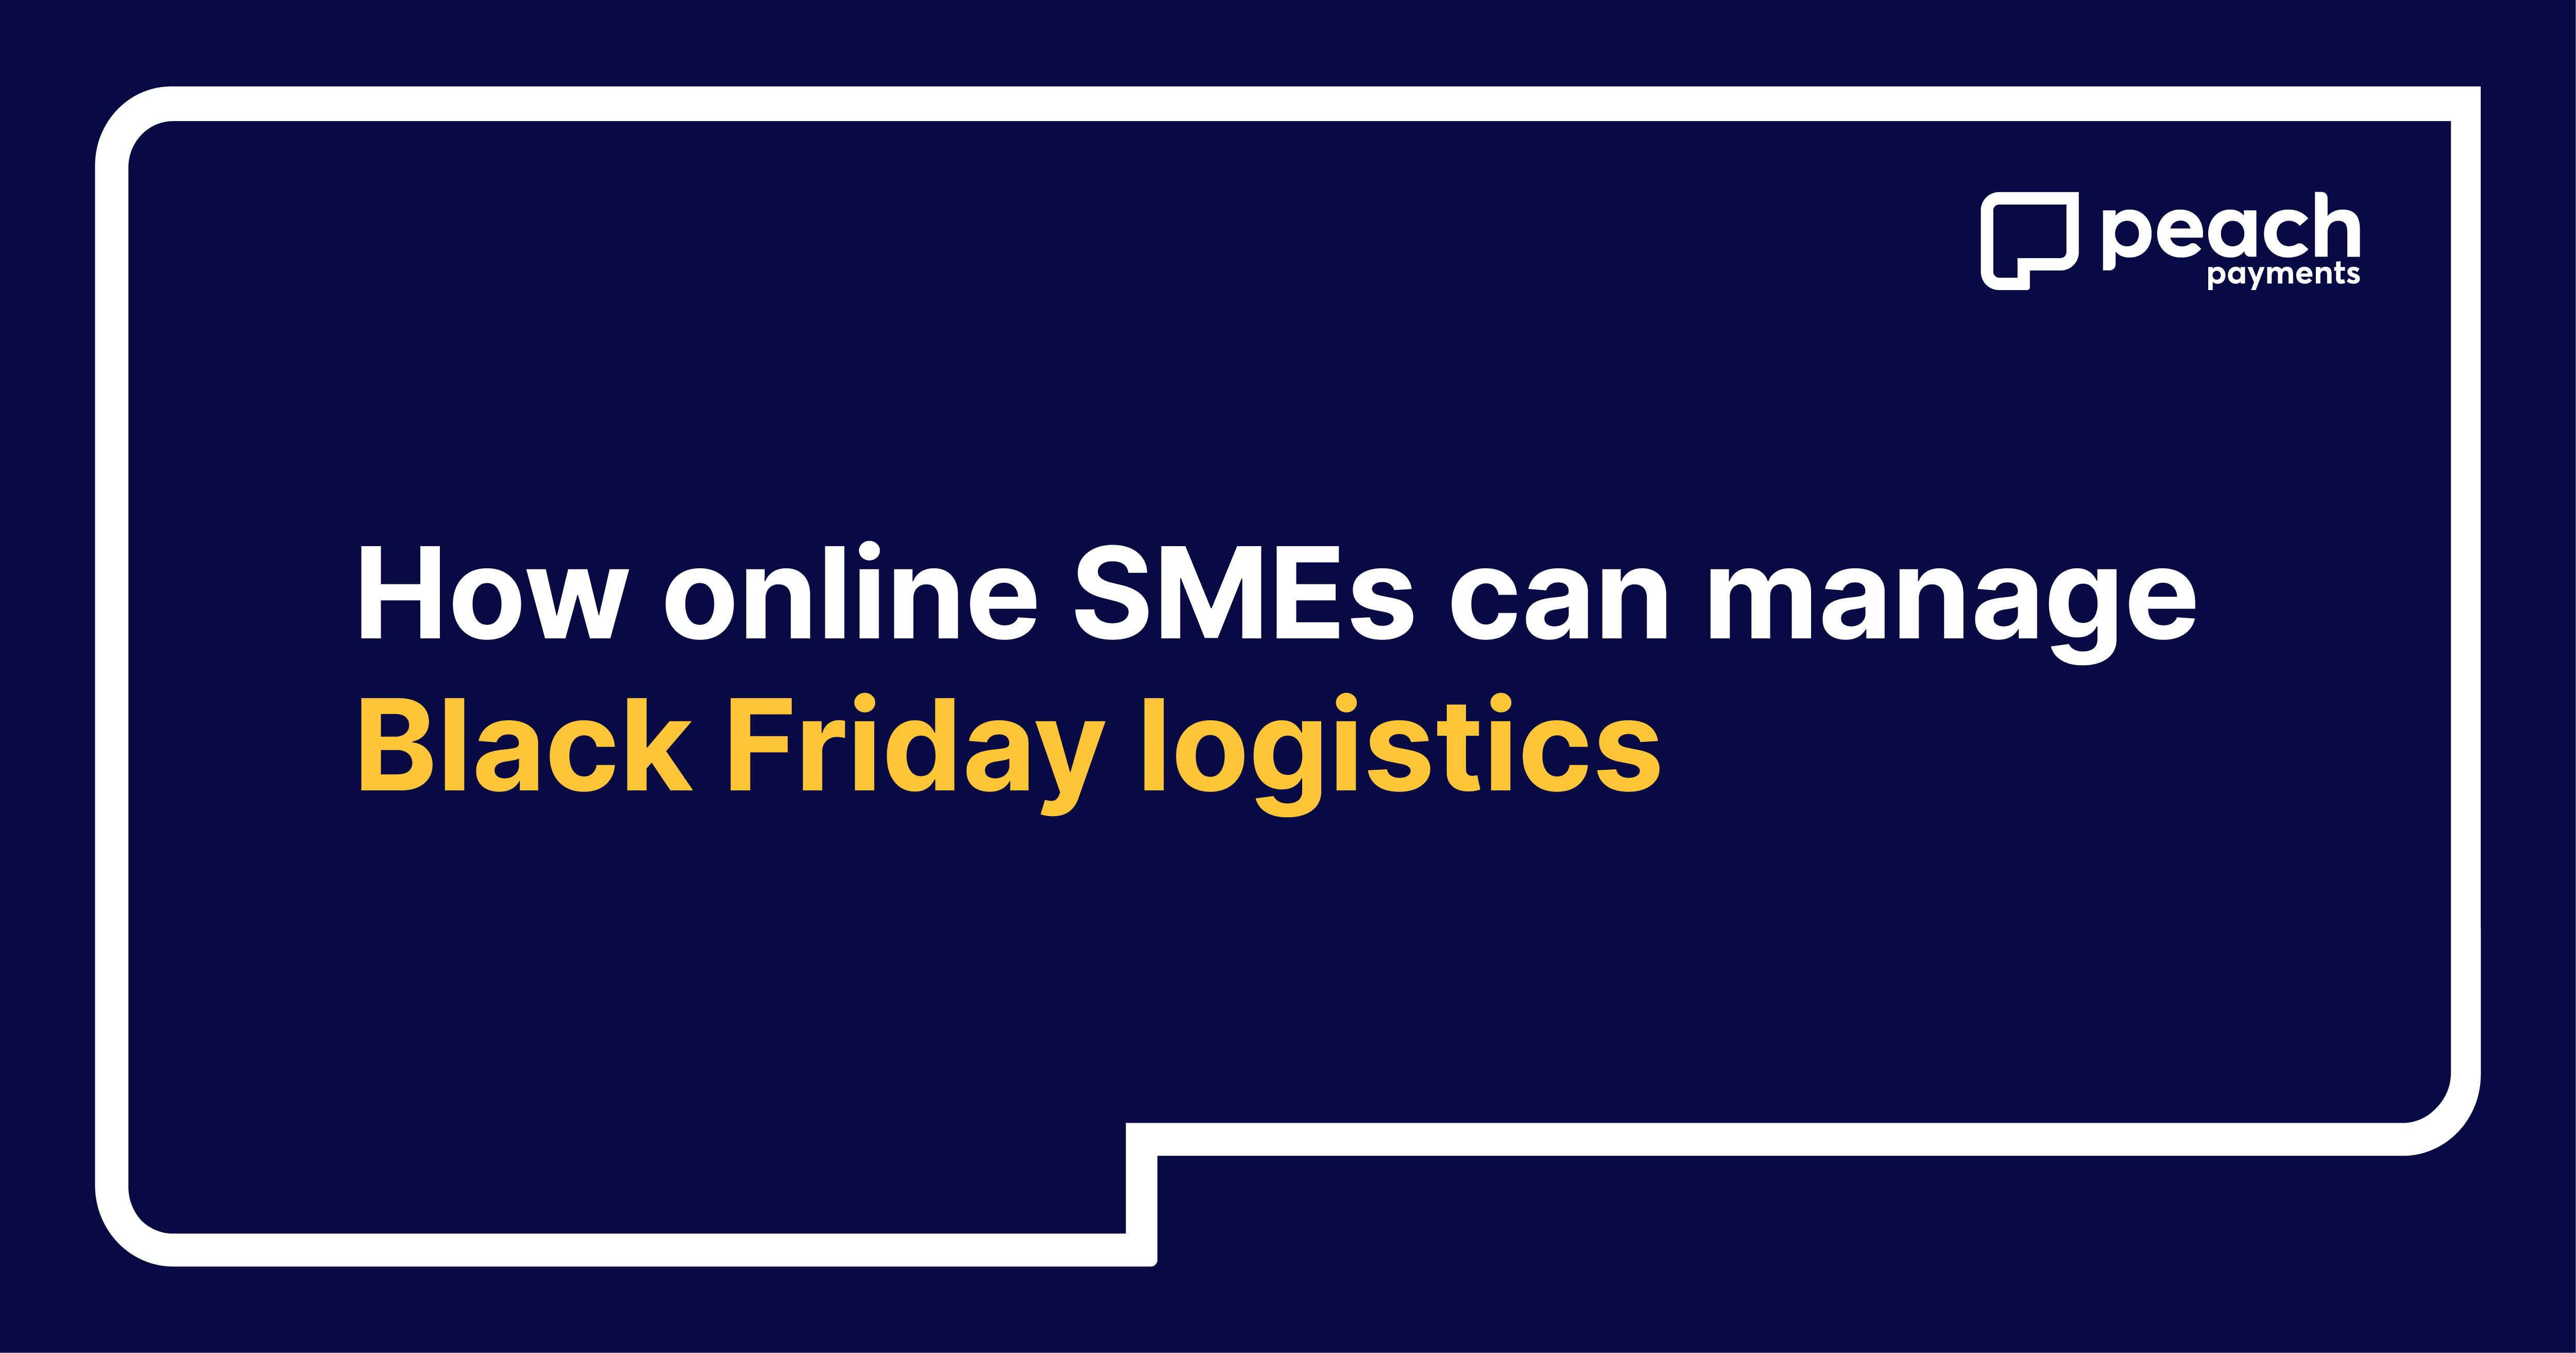 How online SMEs can manage Black Friday logistics